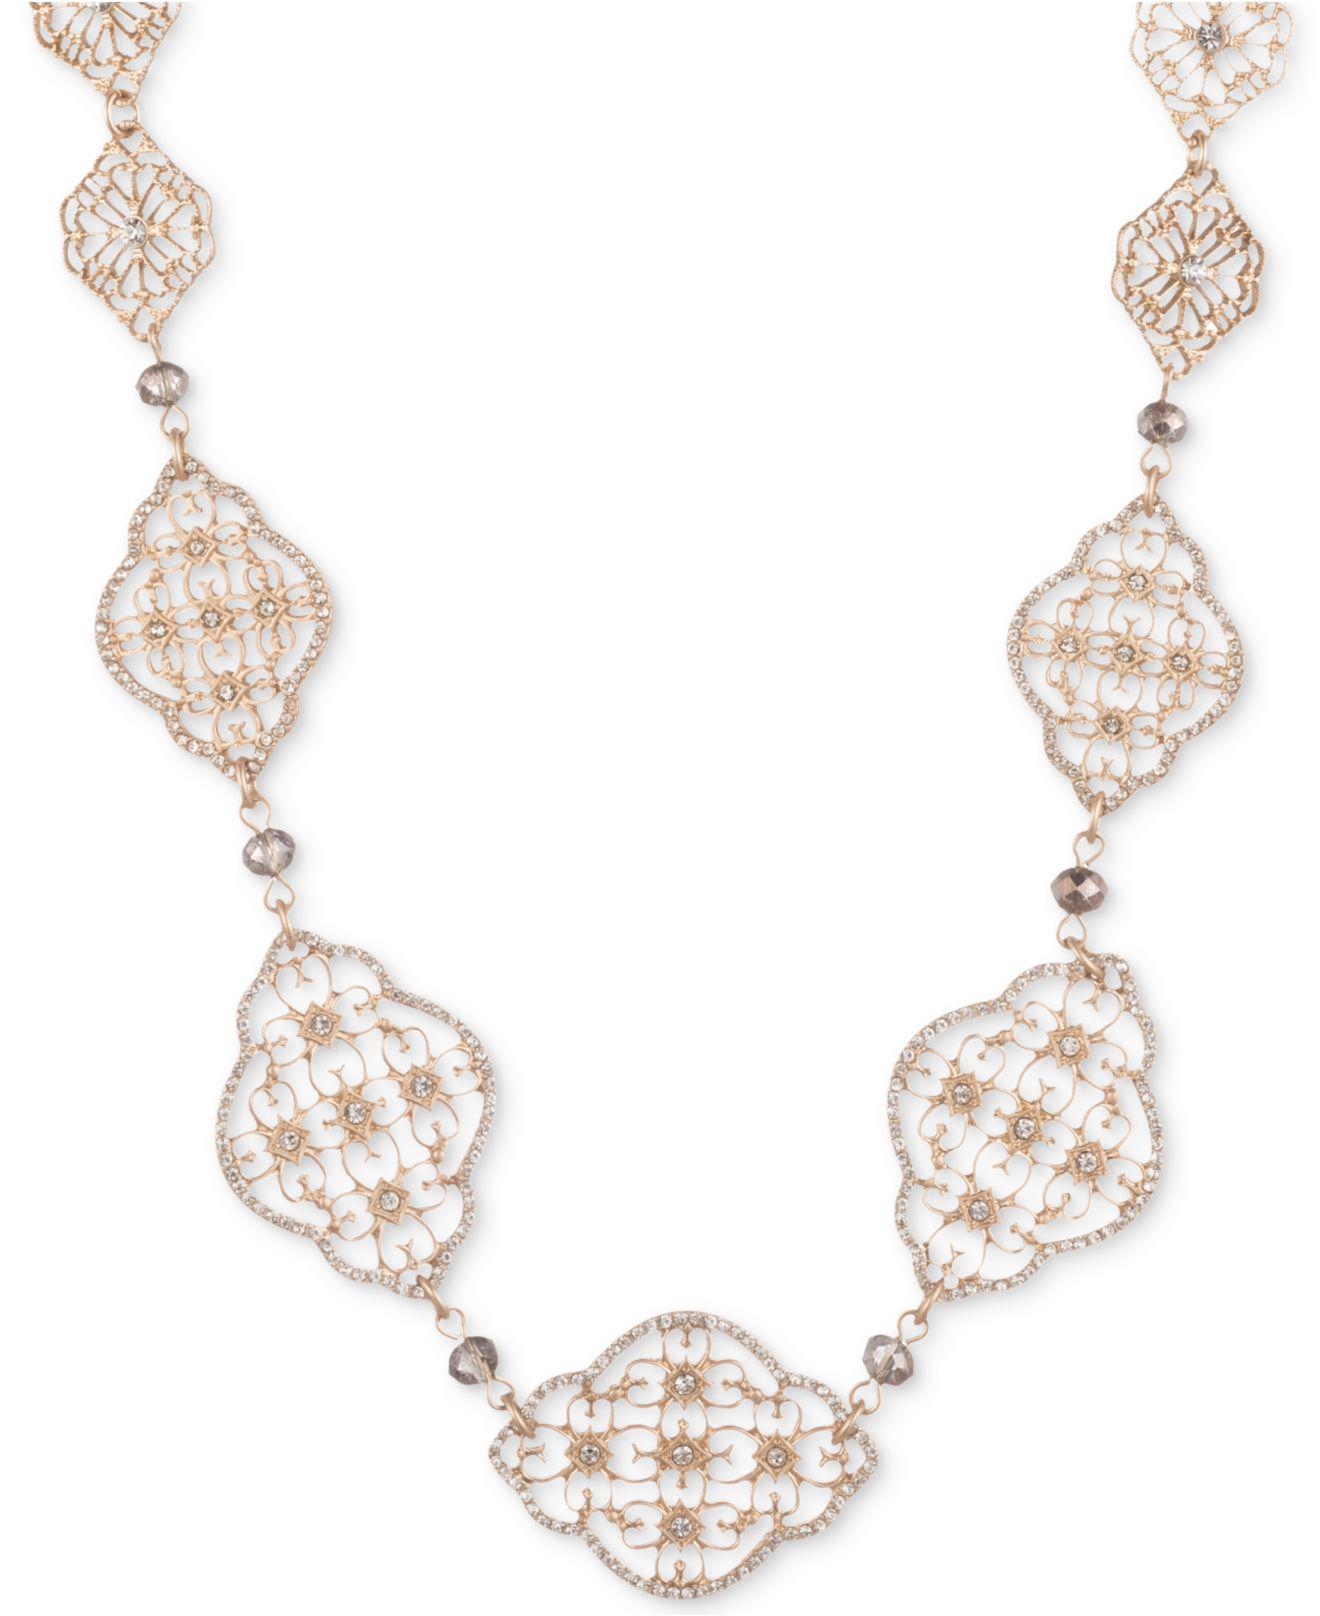 Lyst - Lonna & Lilly Gold-tone Crystal & Bead Collar Necklace, 16